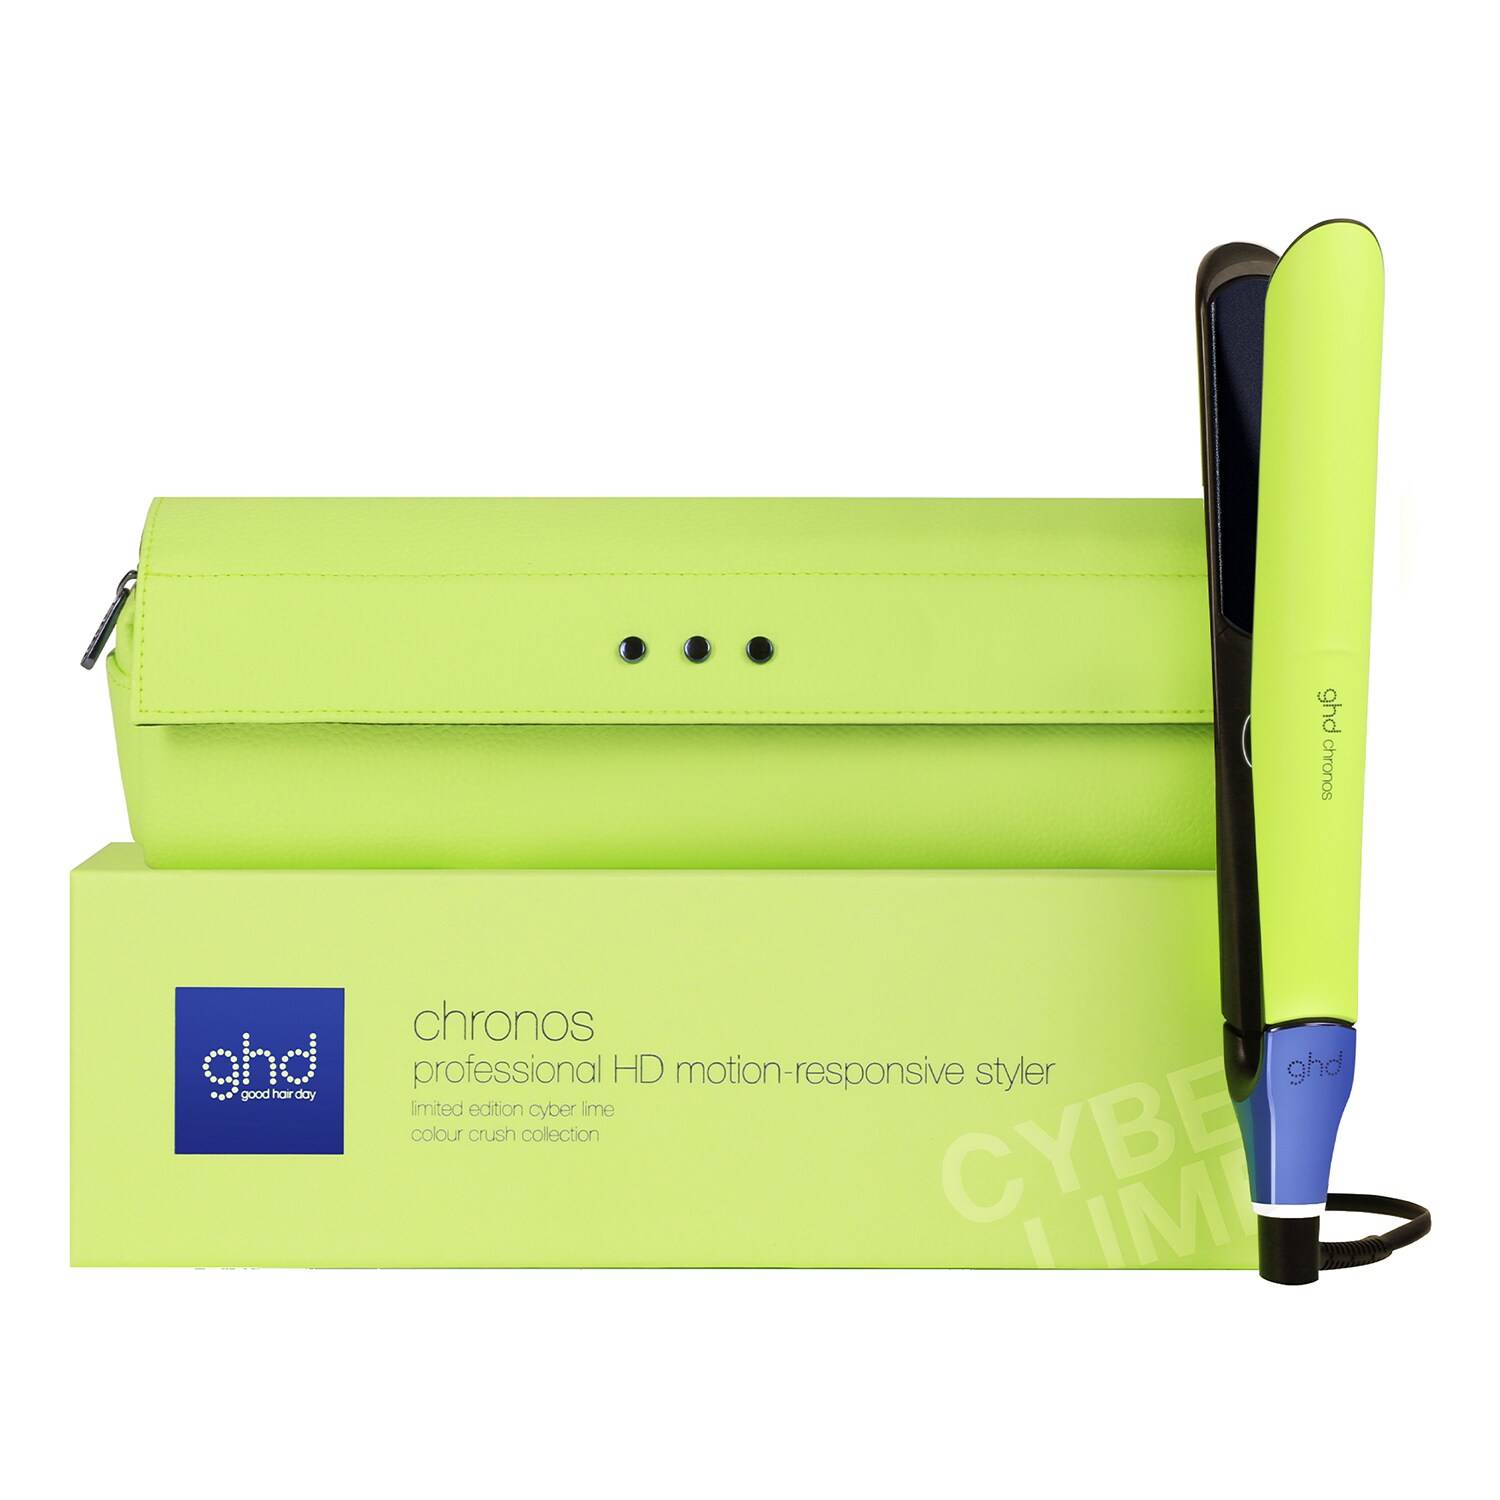 Ghd Chronos Professional Hair Styler In Cyber Lime - Limited Edition